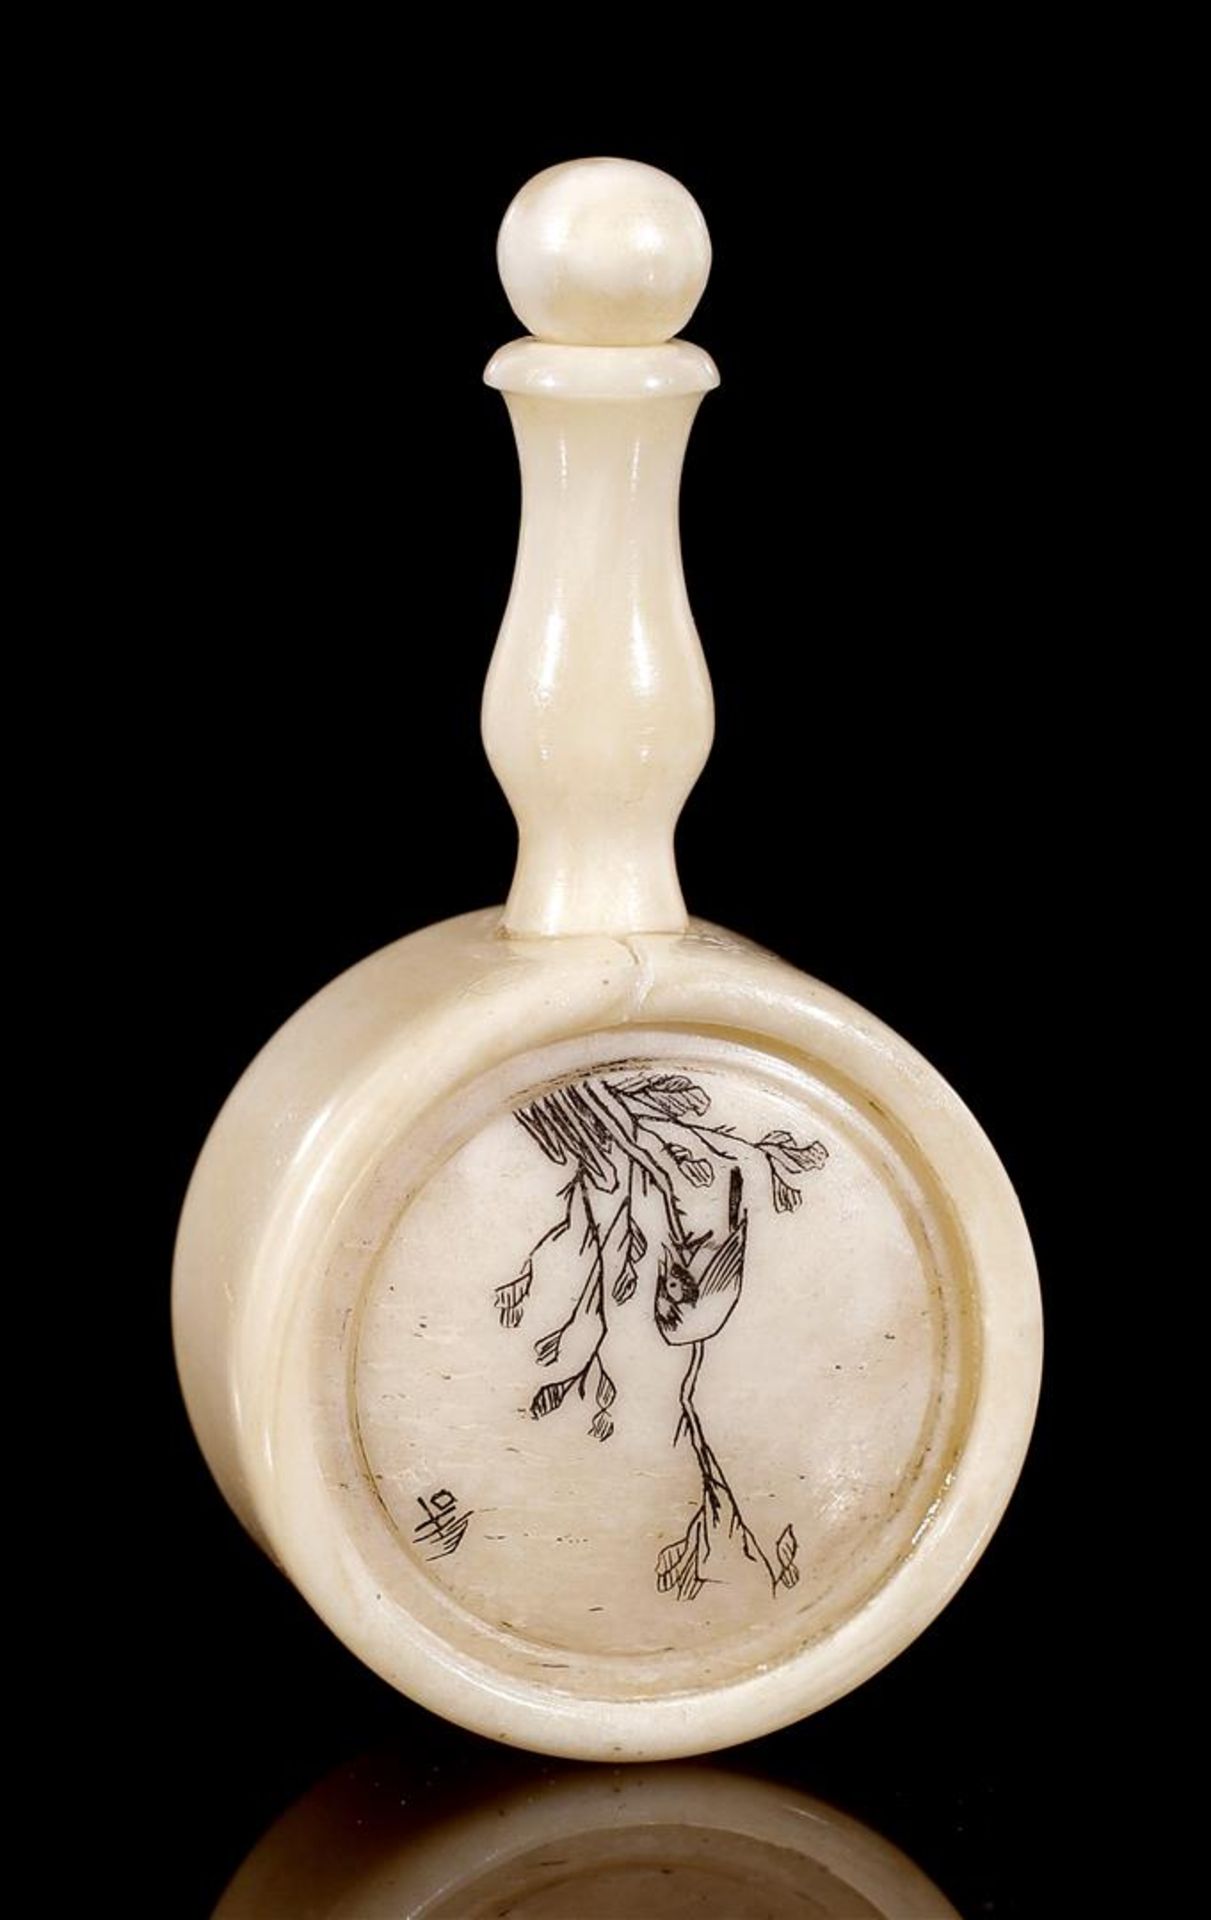 Ivory snuff bottle with engraved decoration, China ca.1880, 7 cm, 30.3 grams. With certificate